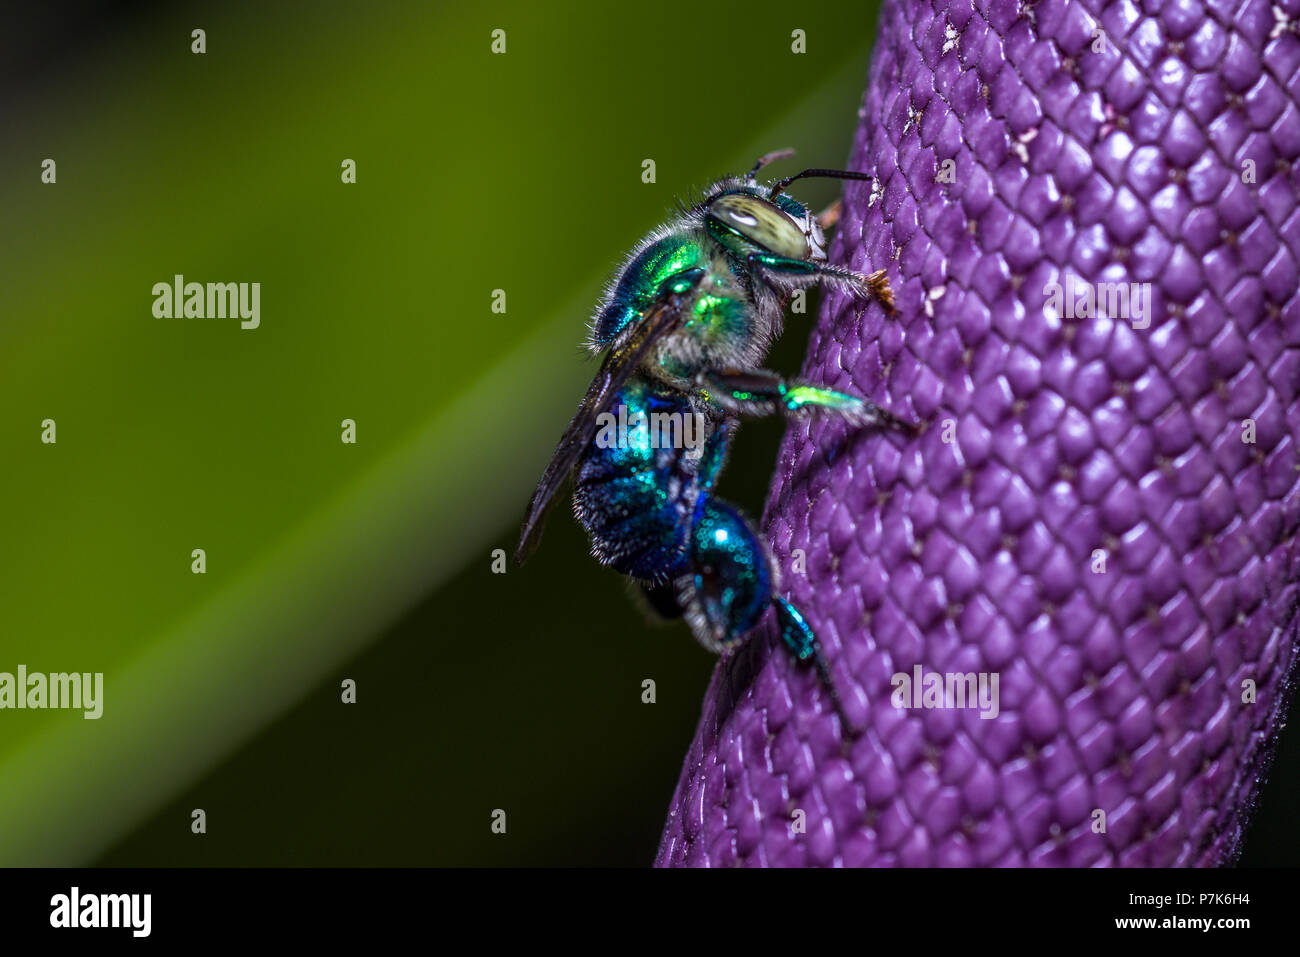 Euglossini bee also called orchid bees on a purple flower Stock Photo